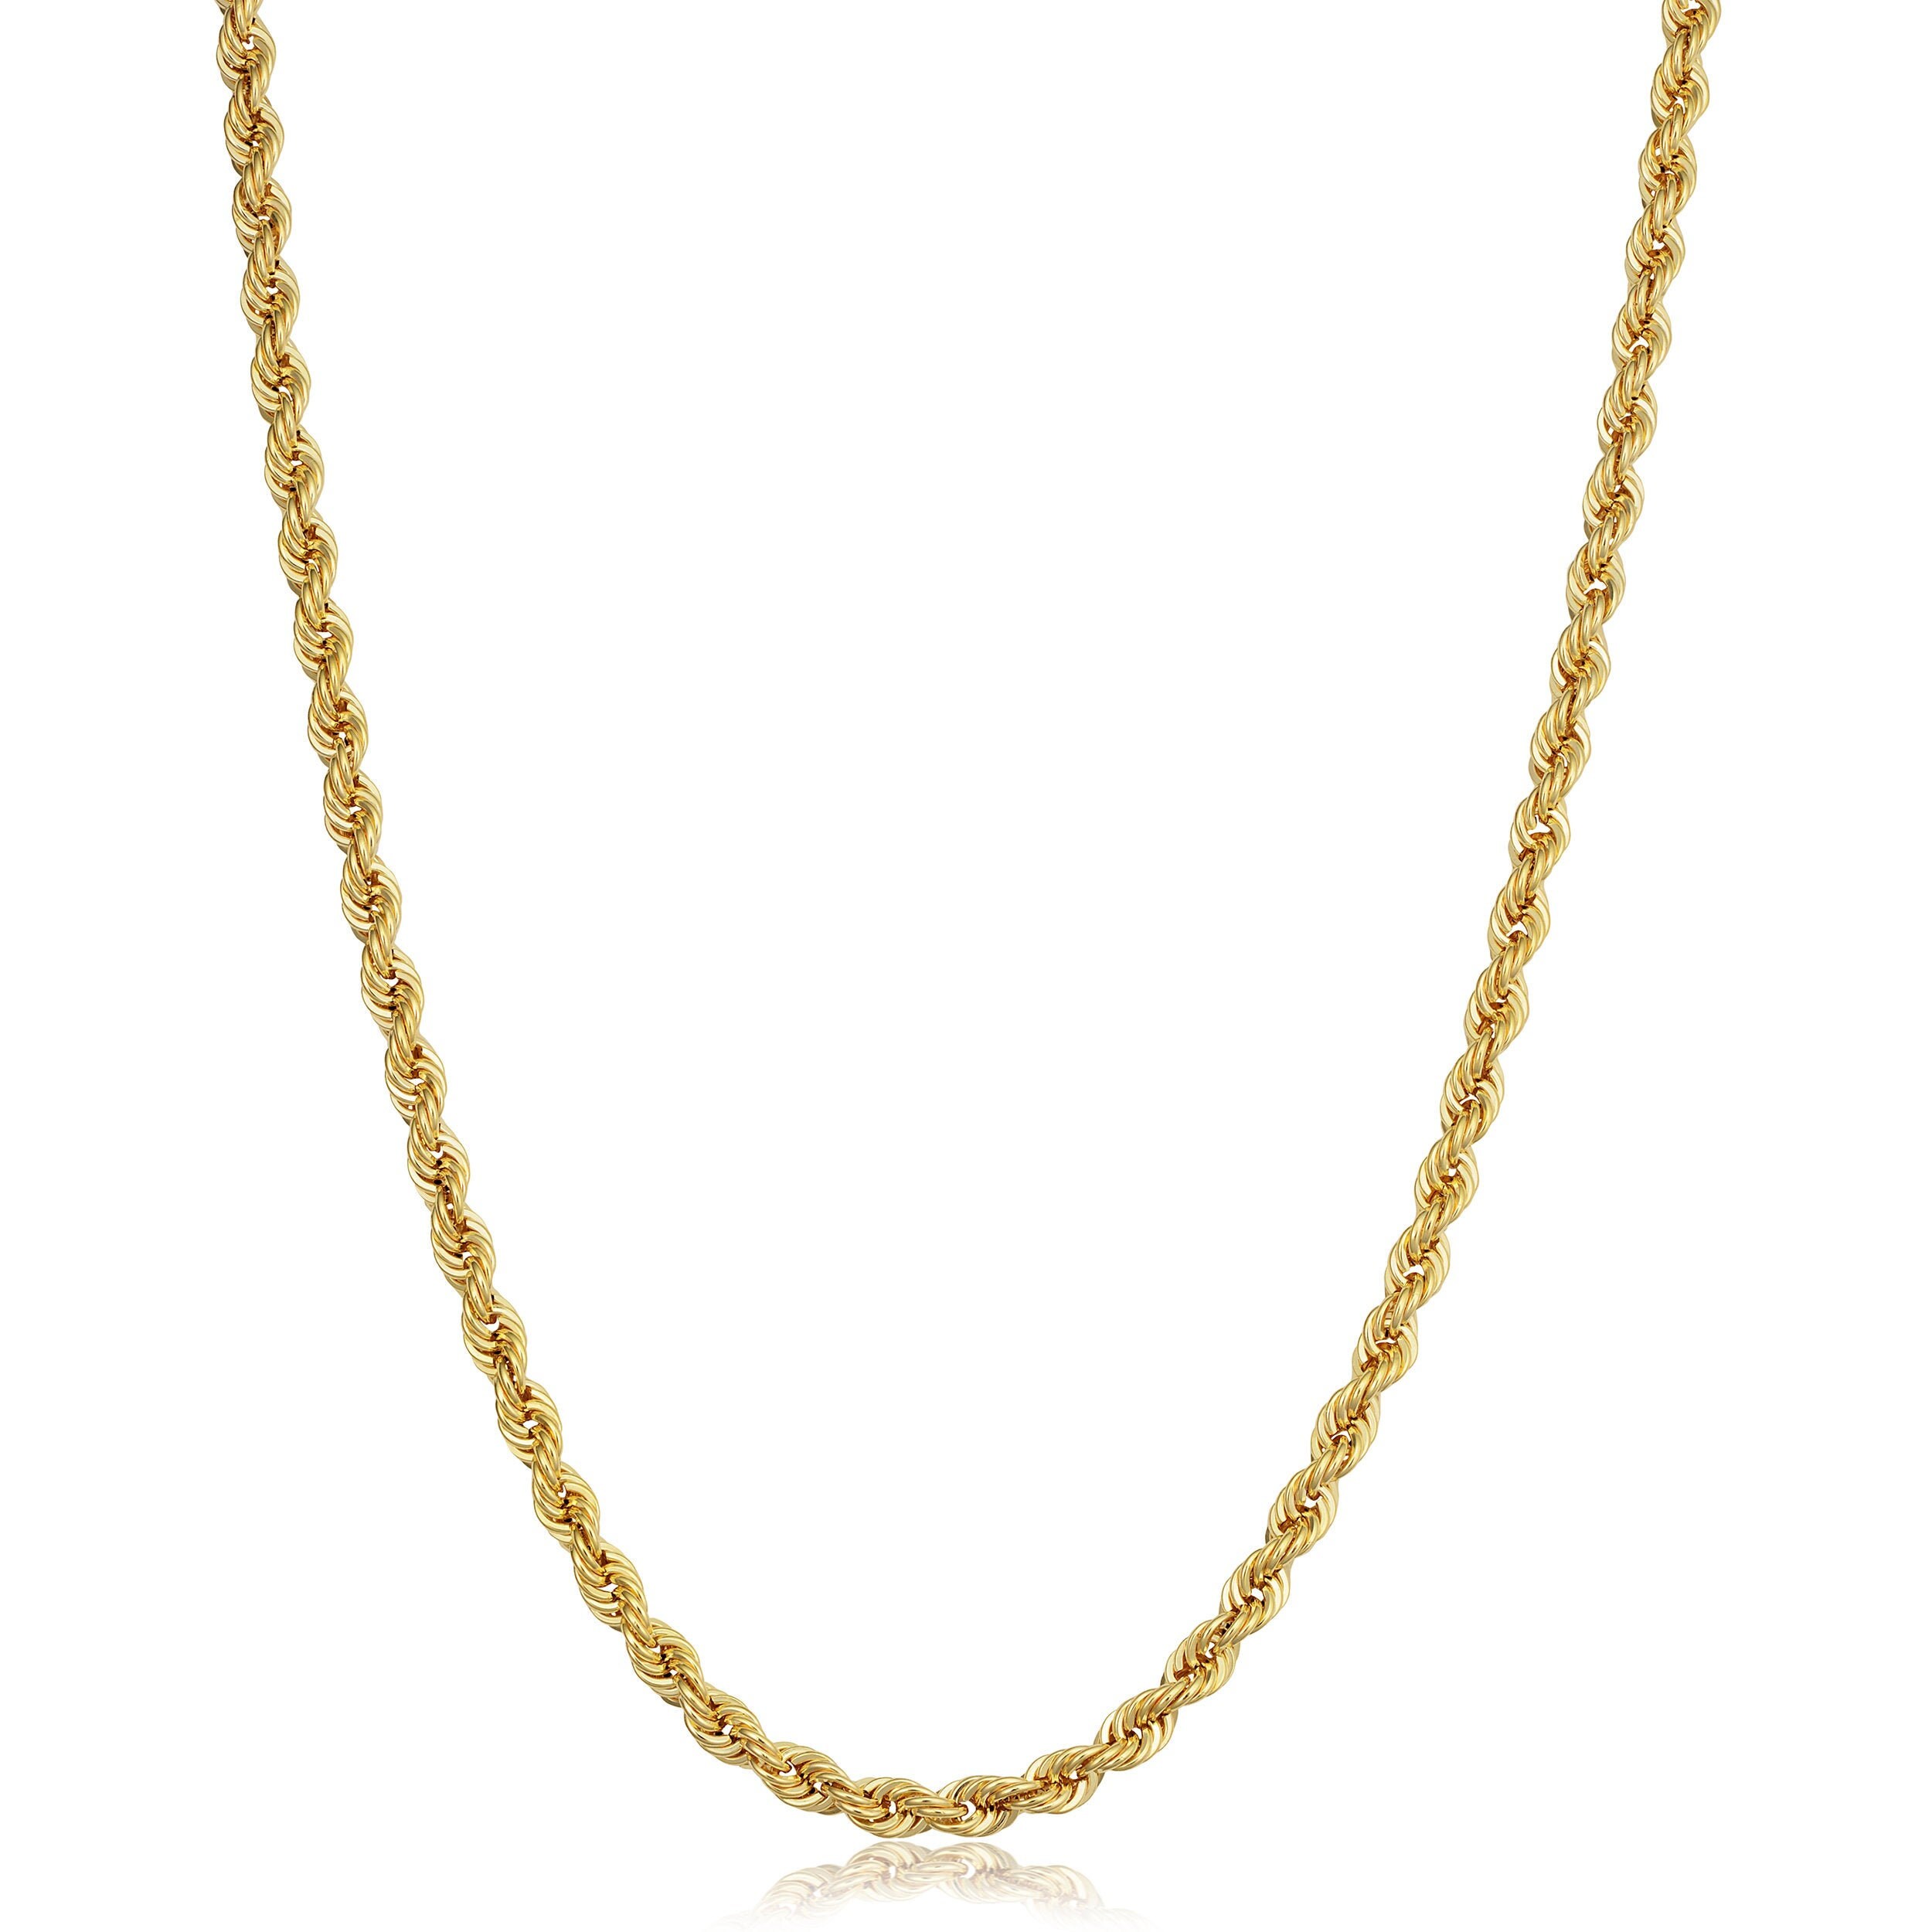 Men's or Women's 10k Yellow Gold 3.2 Mm Rope Chain Necklace 16, 18